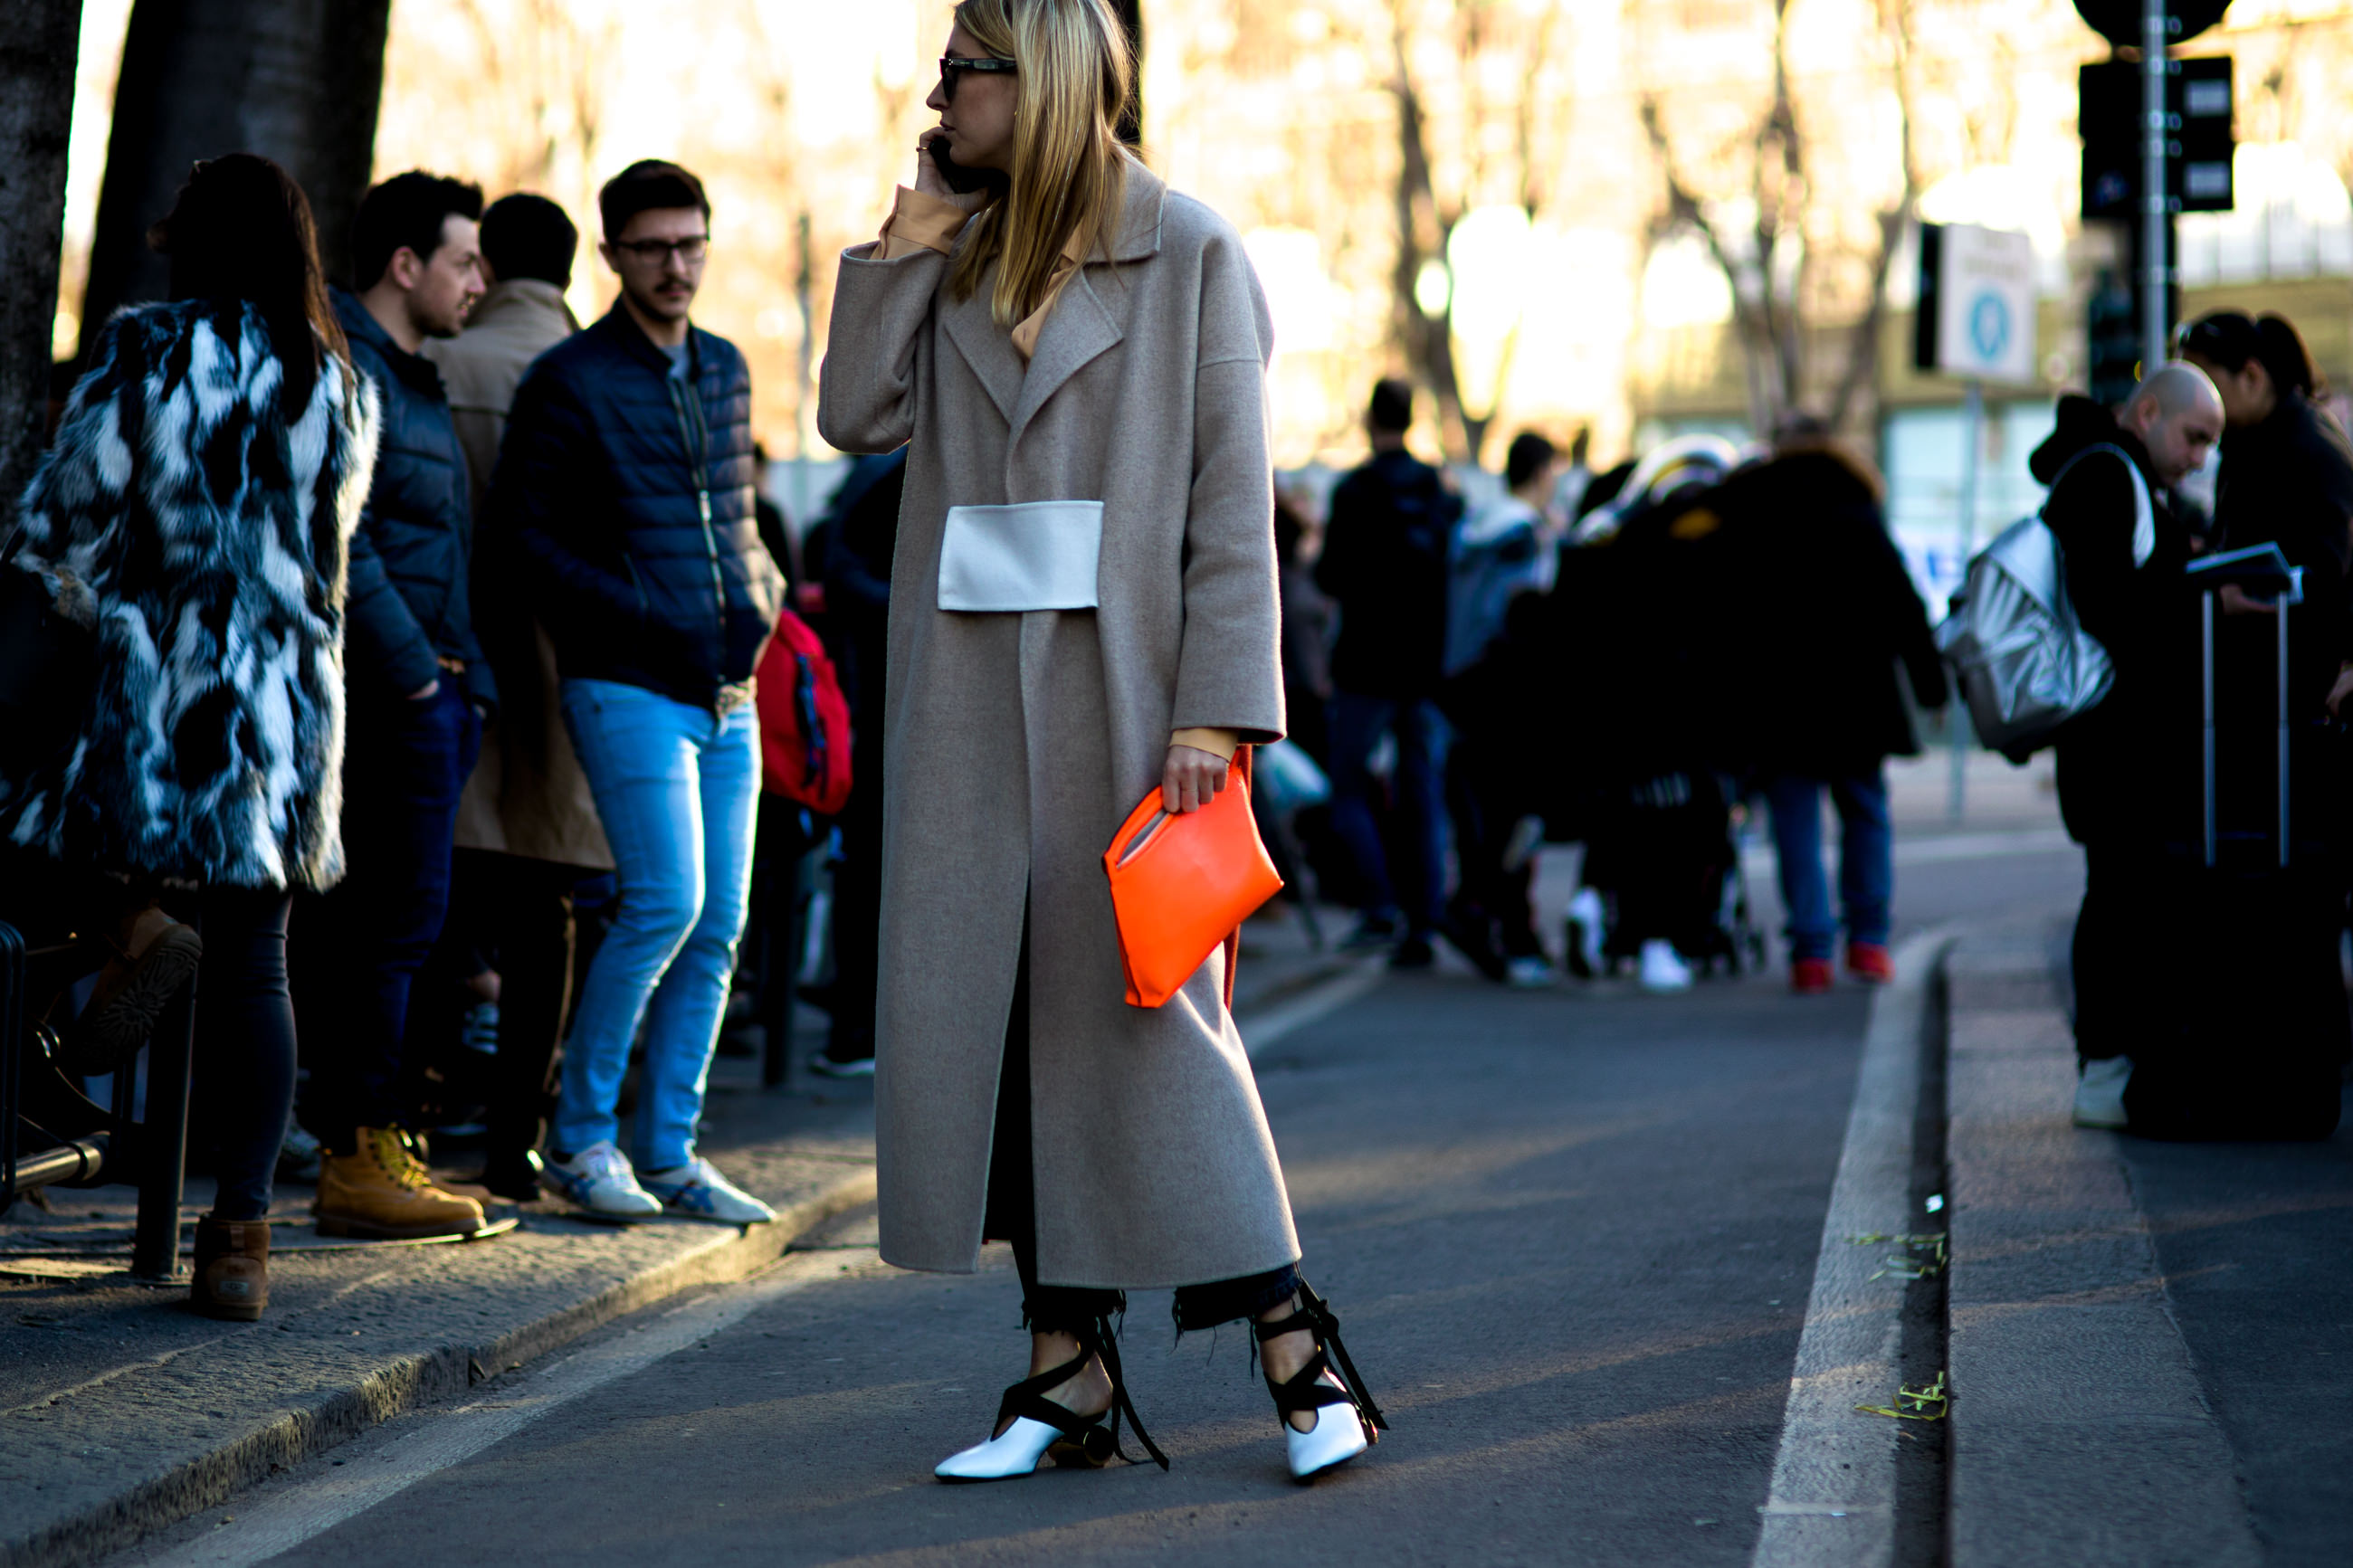 MFW FW17 Street Style: Fashion blogger Camille Charrière wearing a coat and JW Anderson shoes after the Jil Sander fashion show in Milan, Italy